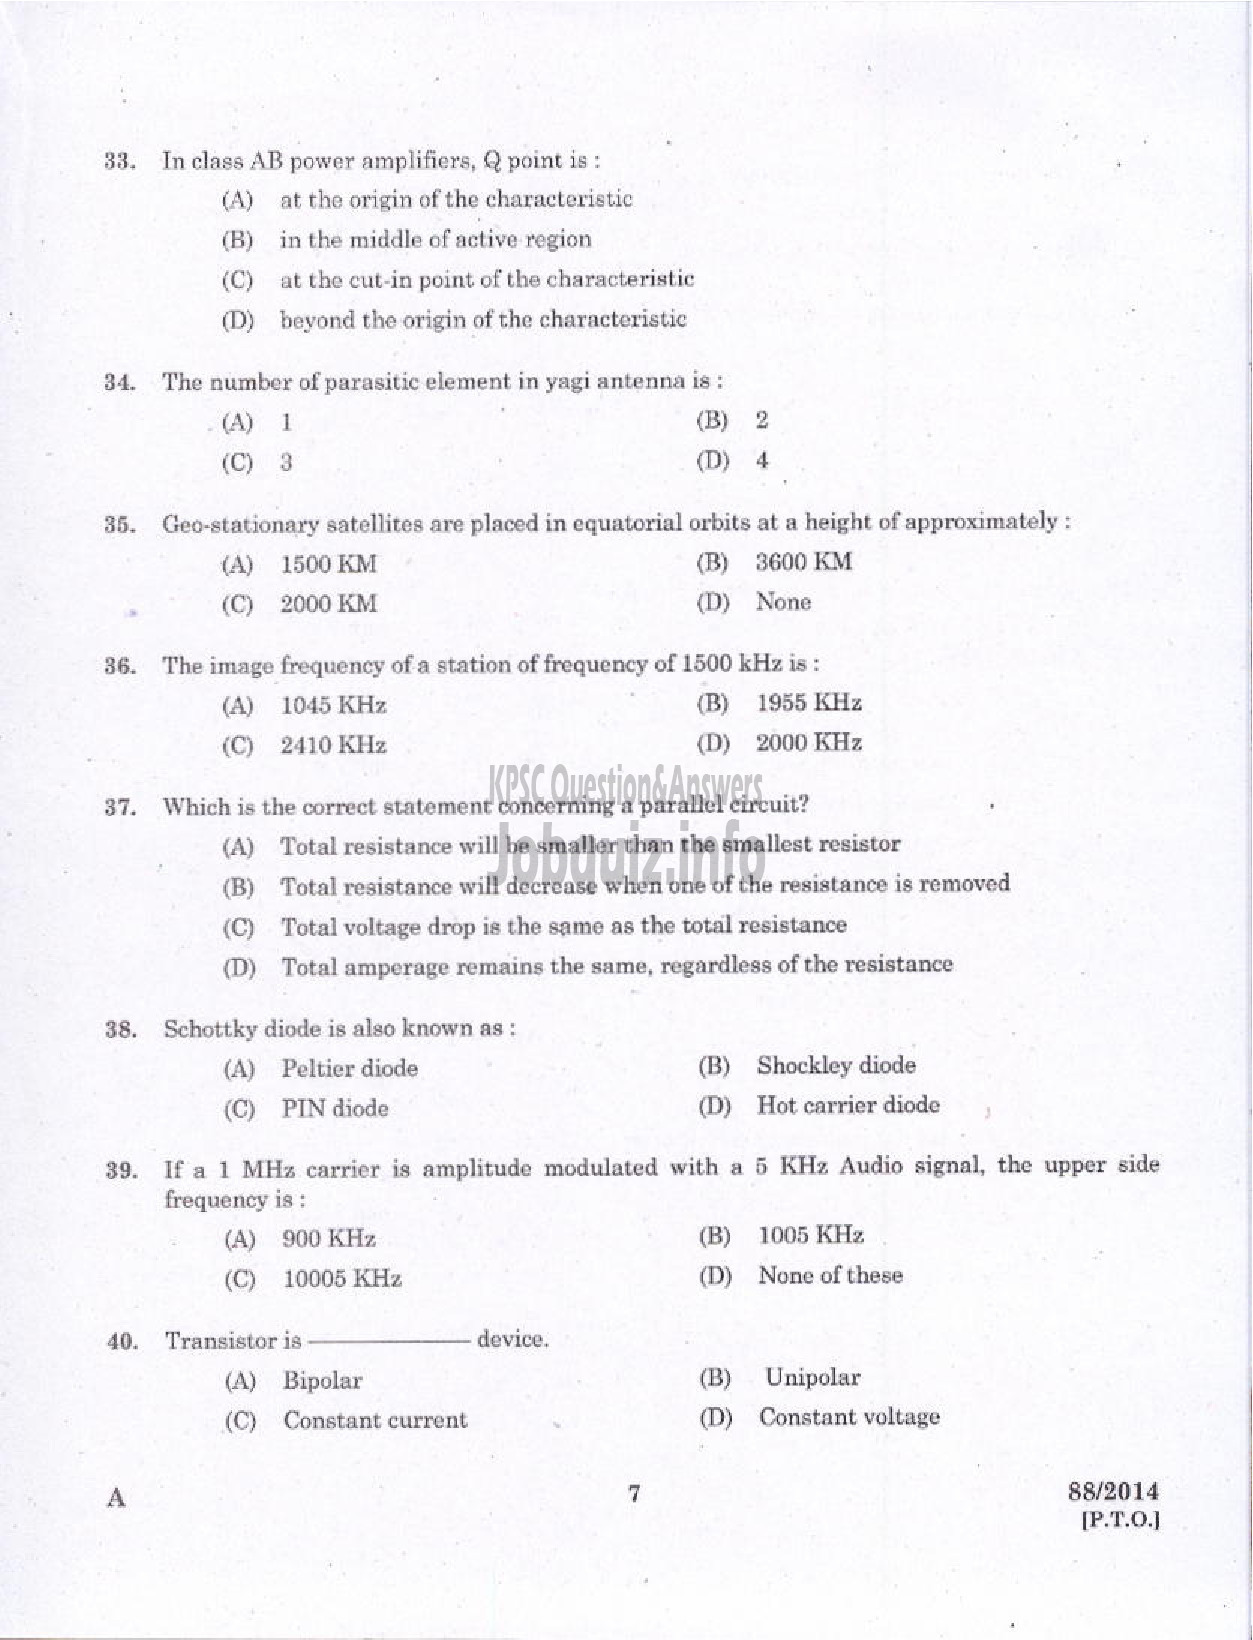 Kerala PSC Question Paper - JUNIOR INSTRUCTOR MECHANICAL CONSUMER ELECTRONICS INDUSTRIAL TRAINING DEPARTMENT-5